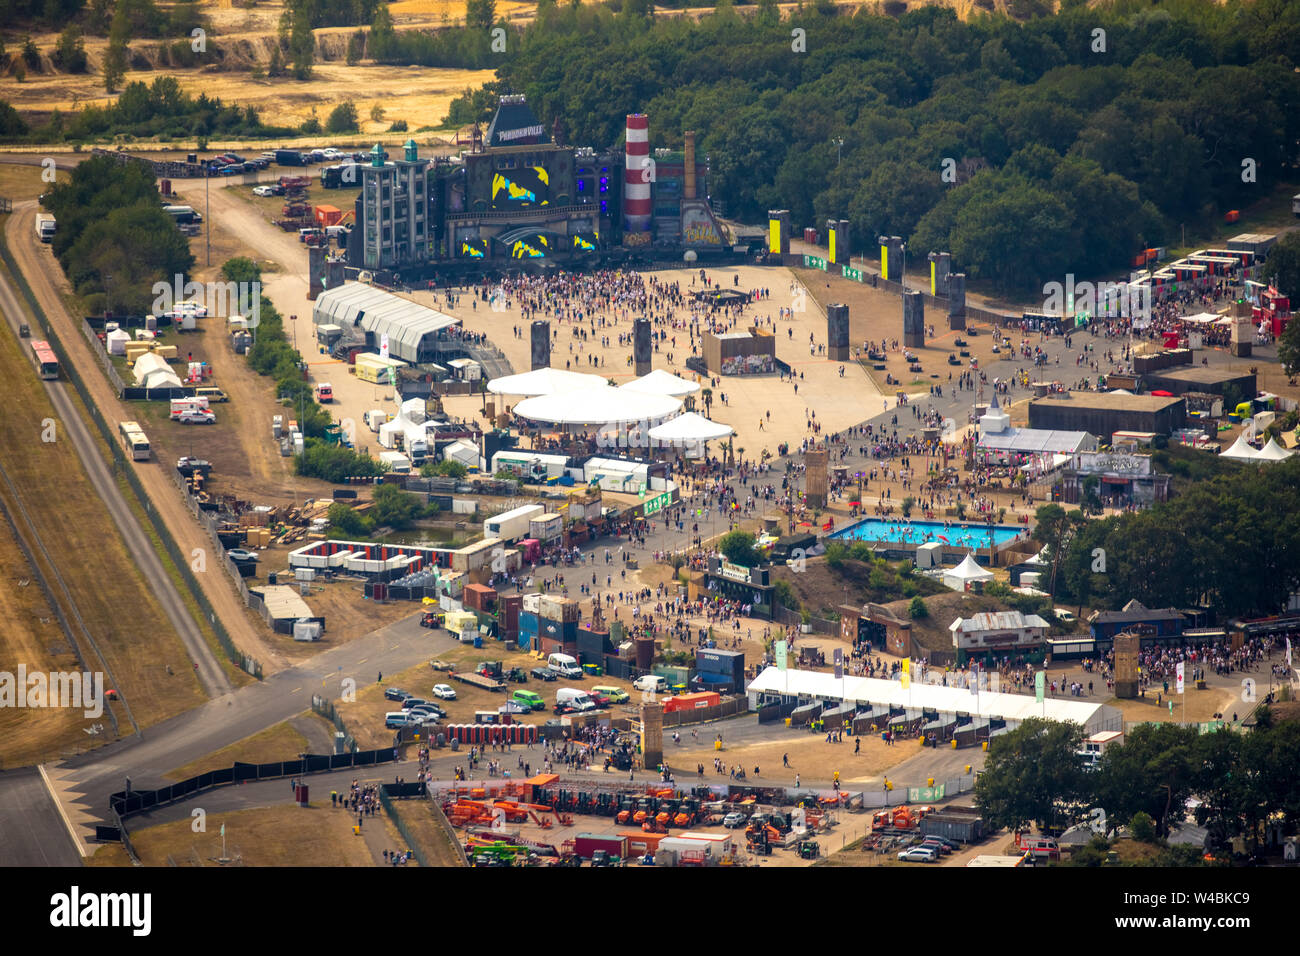 Luftbild Festival ParookaVille 2019 at Weeze Airport, music festival in the field of electronic dance music in Weeze on the Lower Rhine, North Rhine-W Stock Photo